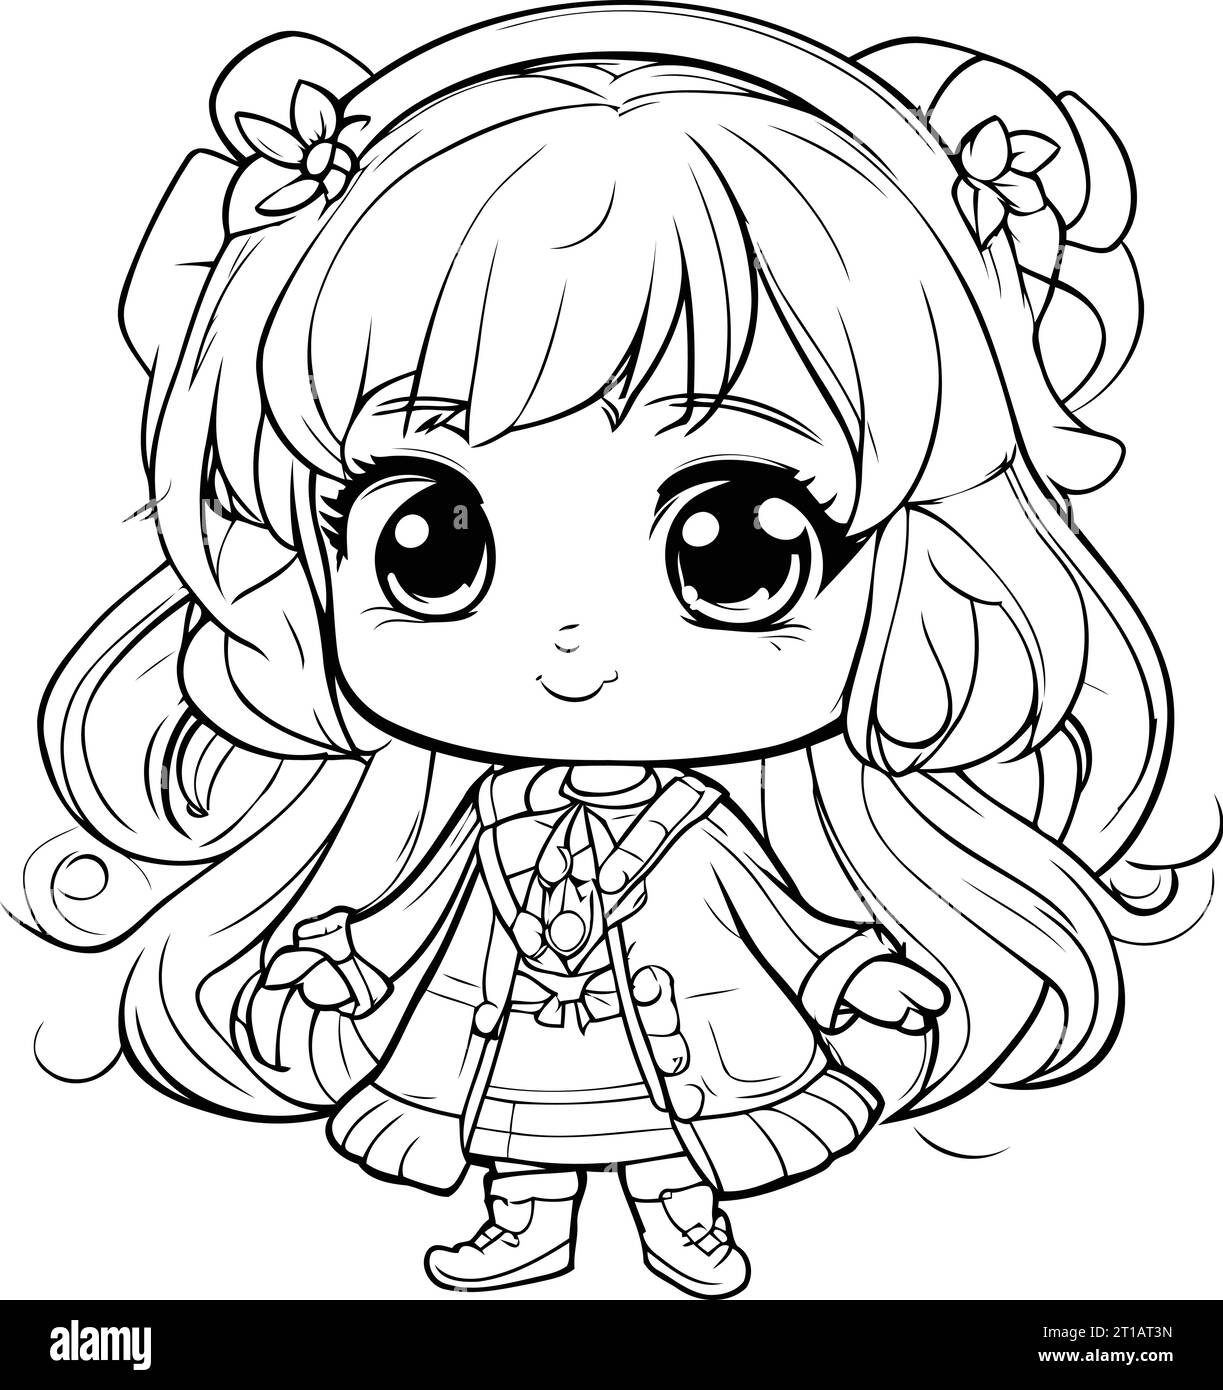 Cute little girl in school uniform. Vector illustration for coloring ...